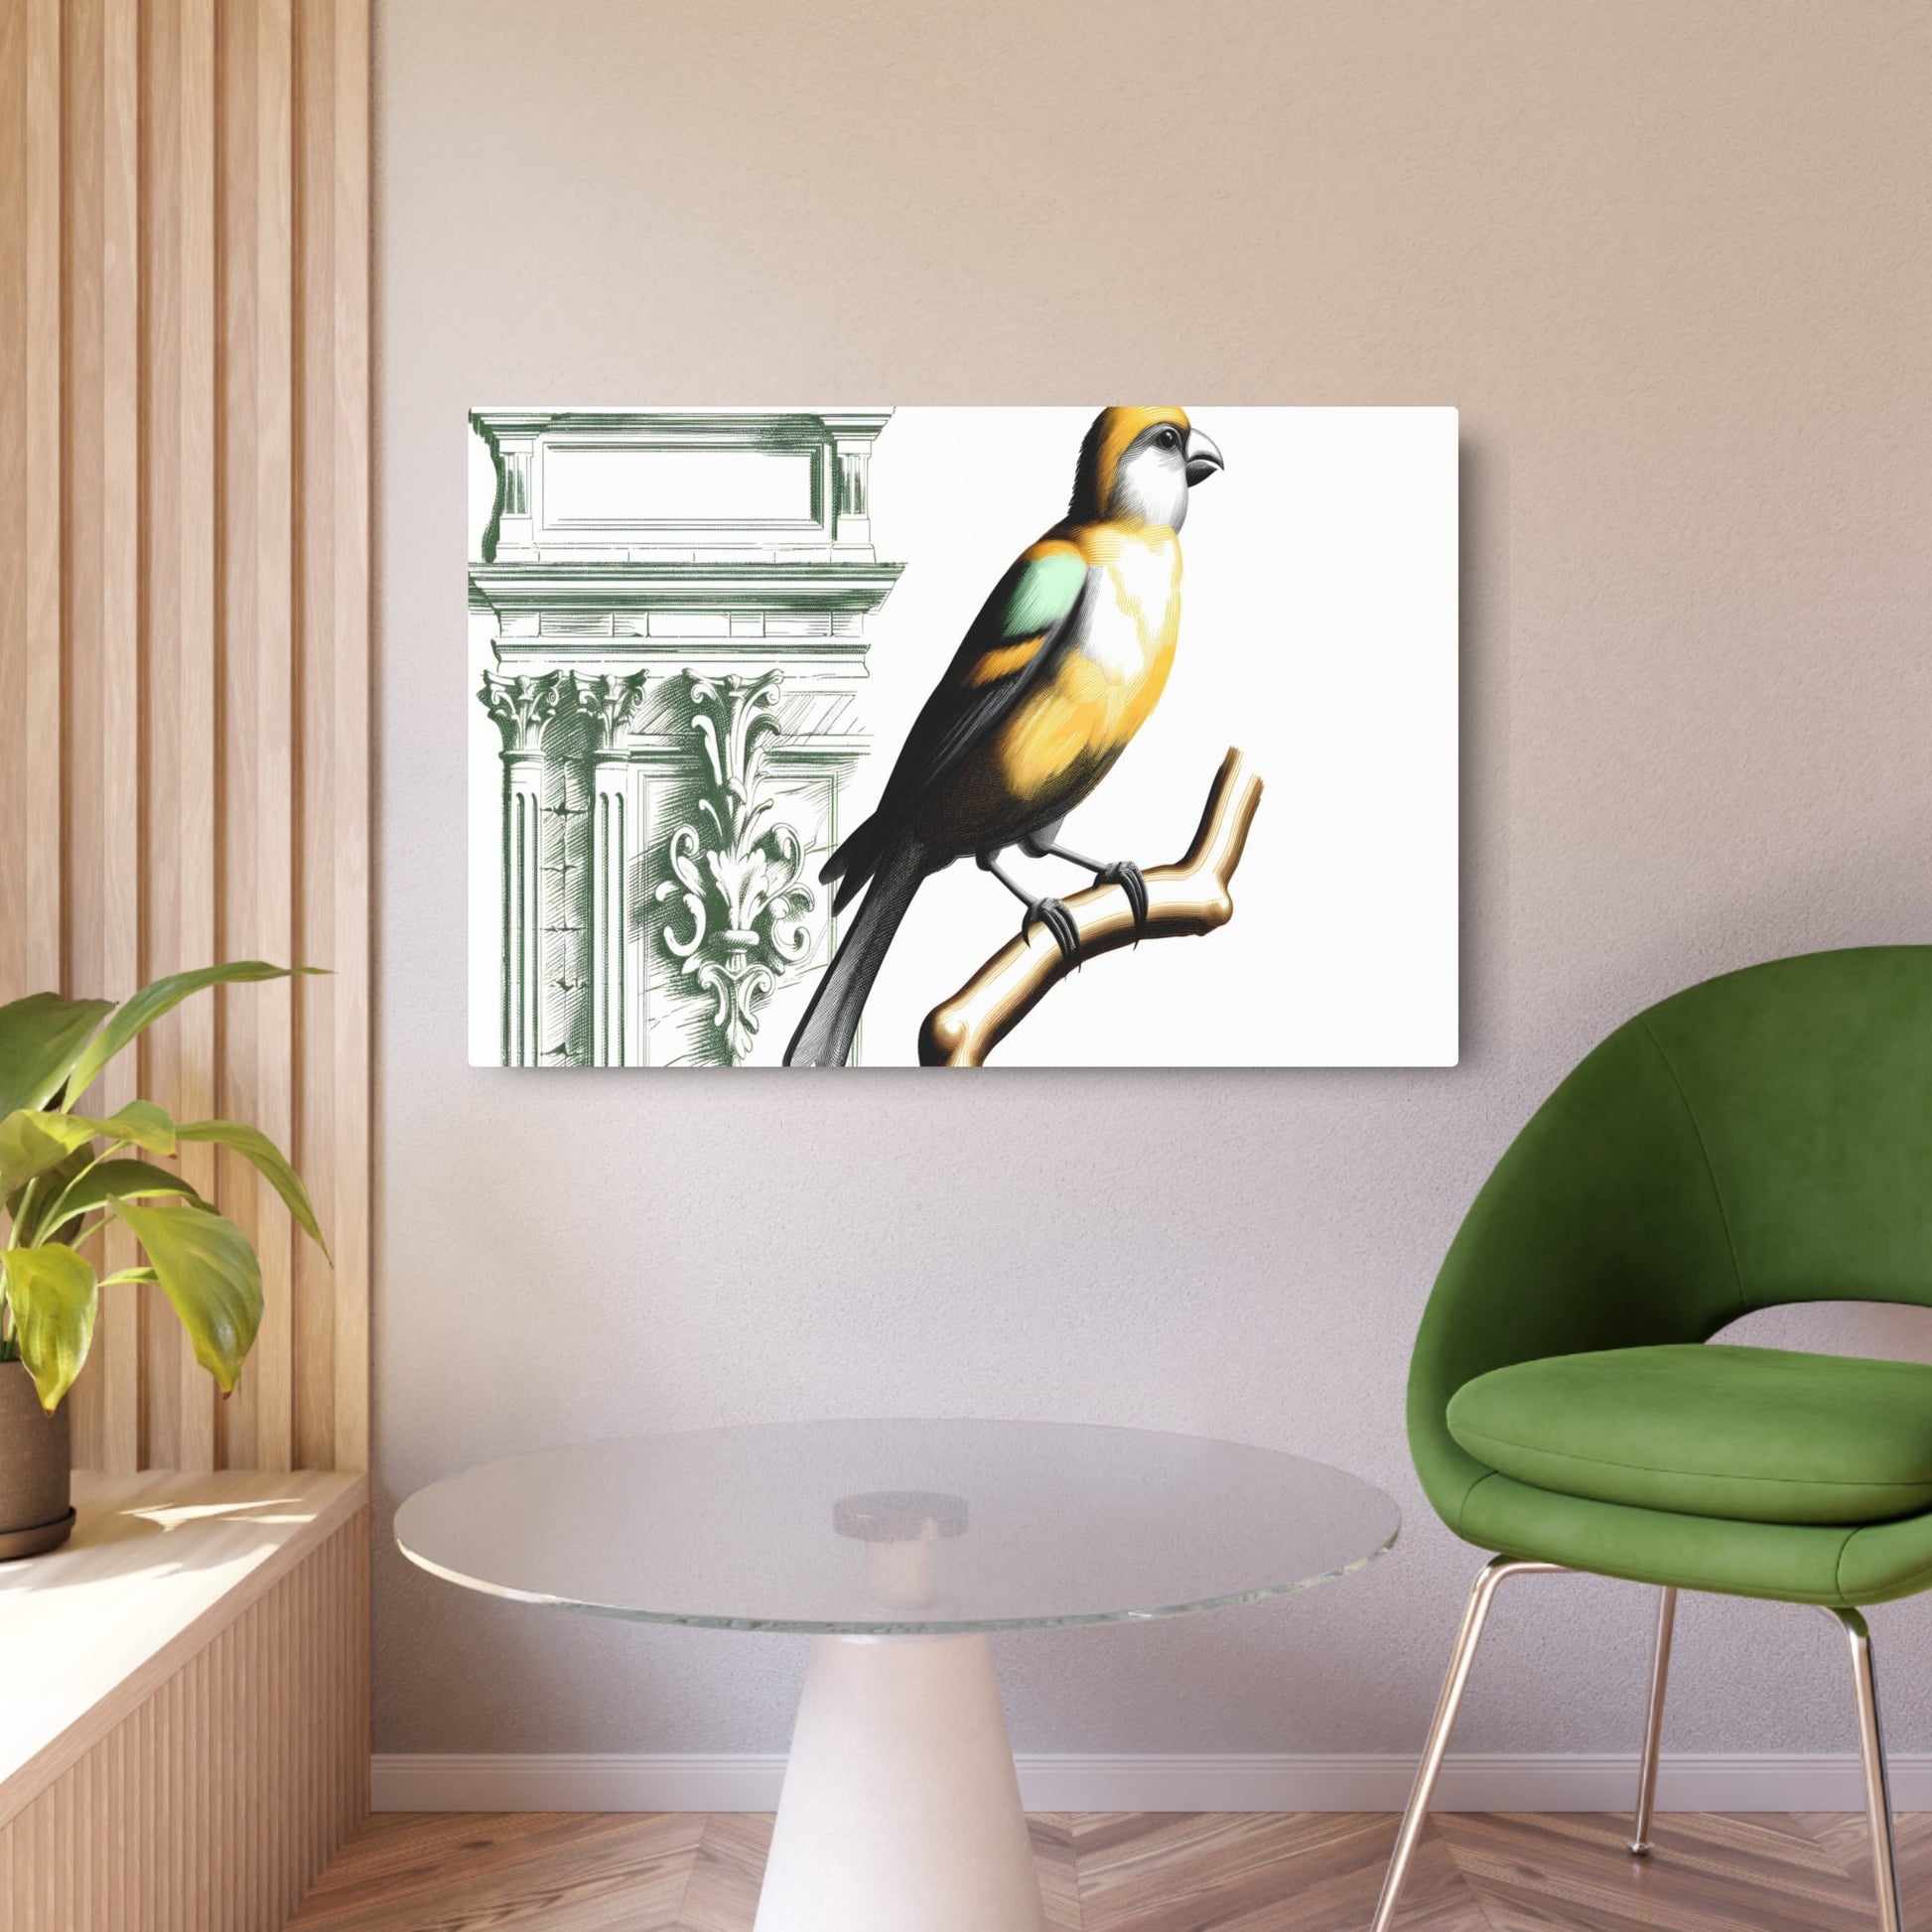 Metal Poster Art | "Neoclassical Style Western Art: Detailed Bird on Branch Scene with Architectural Elements and Dramatic Use of Light, Color, and Contrast" - Metal Poster Art 36″ x 24″ (Horizontal) 0.12''